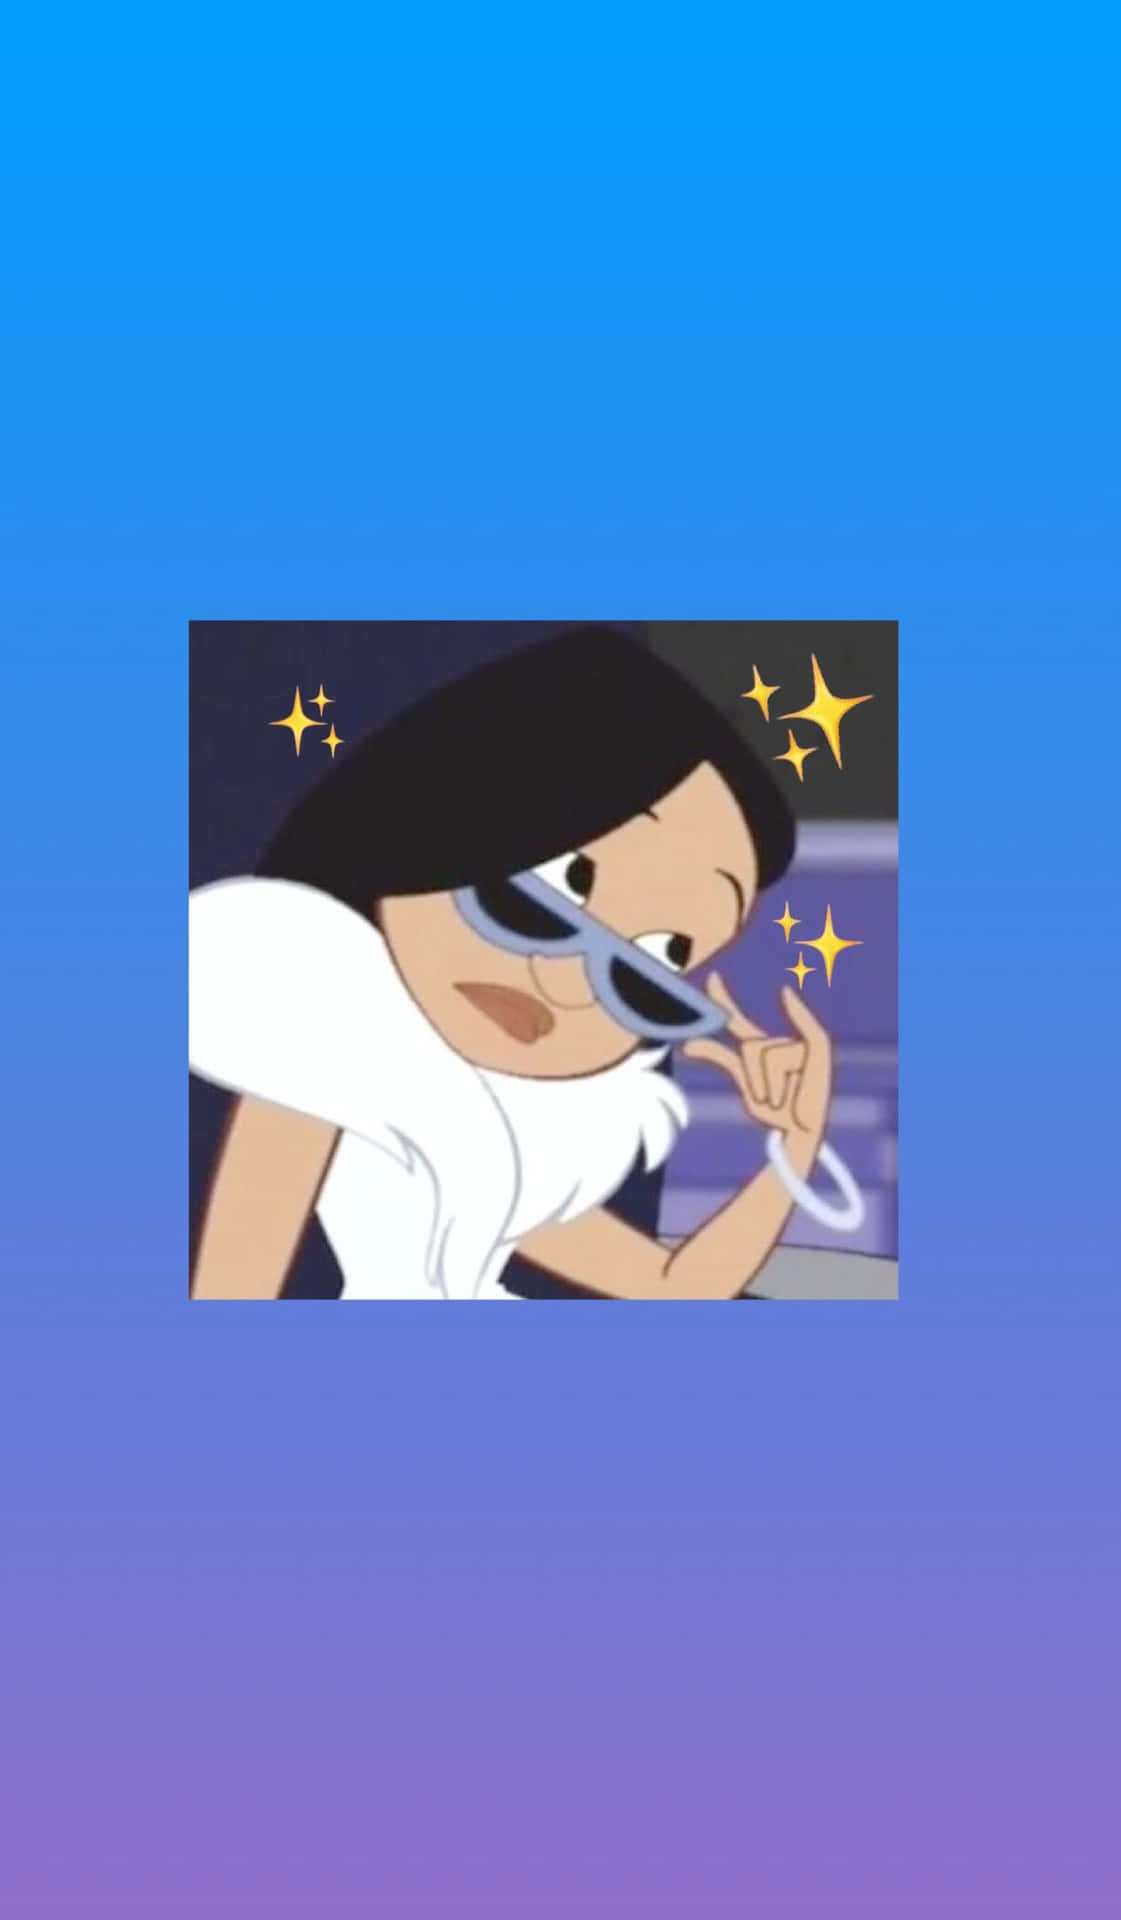 A Cartoon Character With Sunglasses And A White Shirt